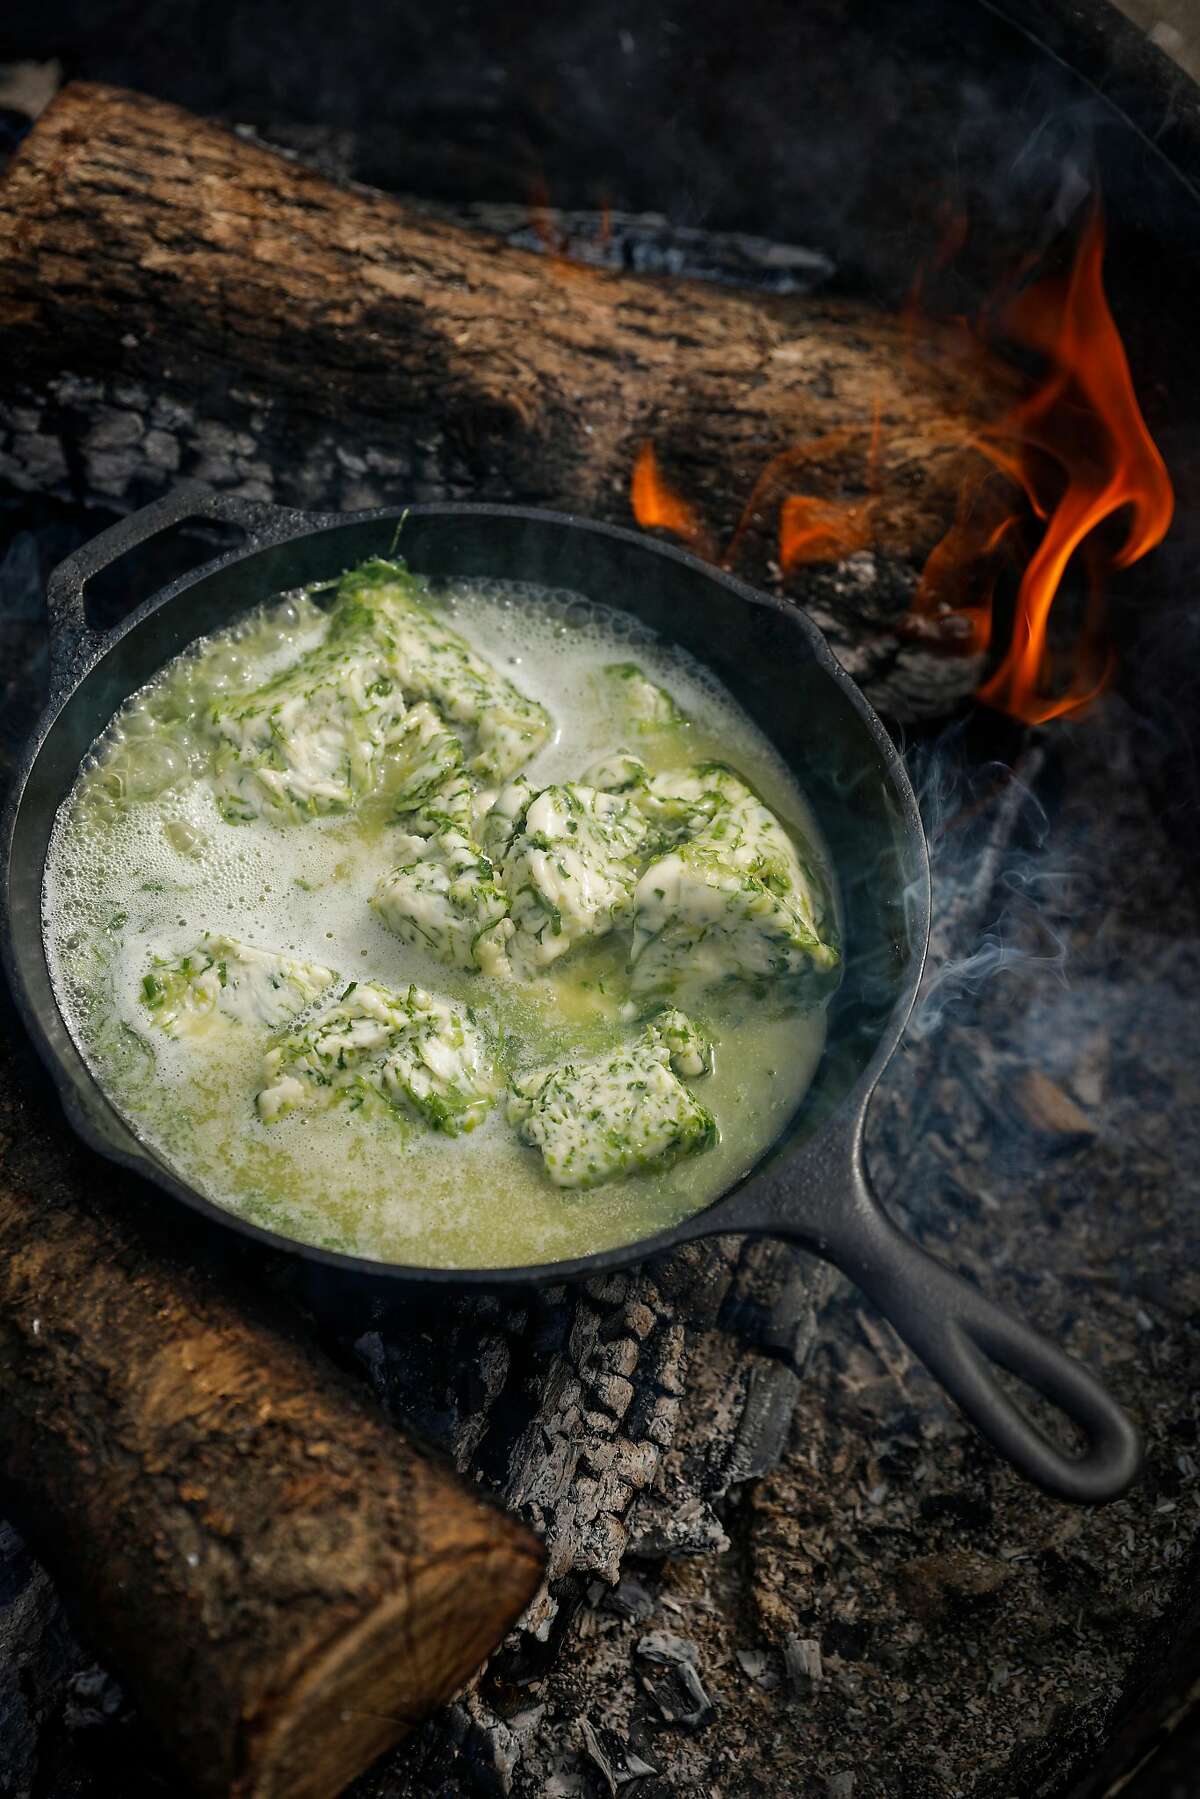 Green garlic butter melts in a cast iron pan over a fire on Monday, April 9, 2018 in Bodega Bay, Calif.